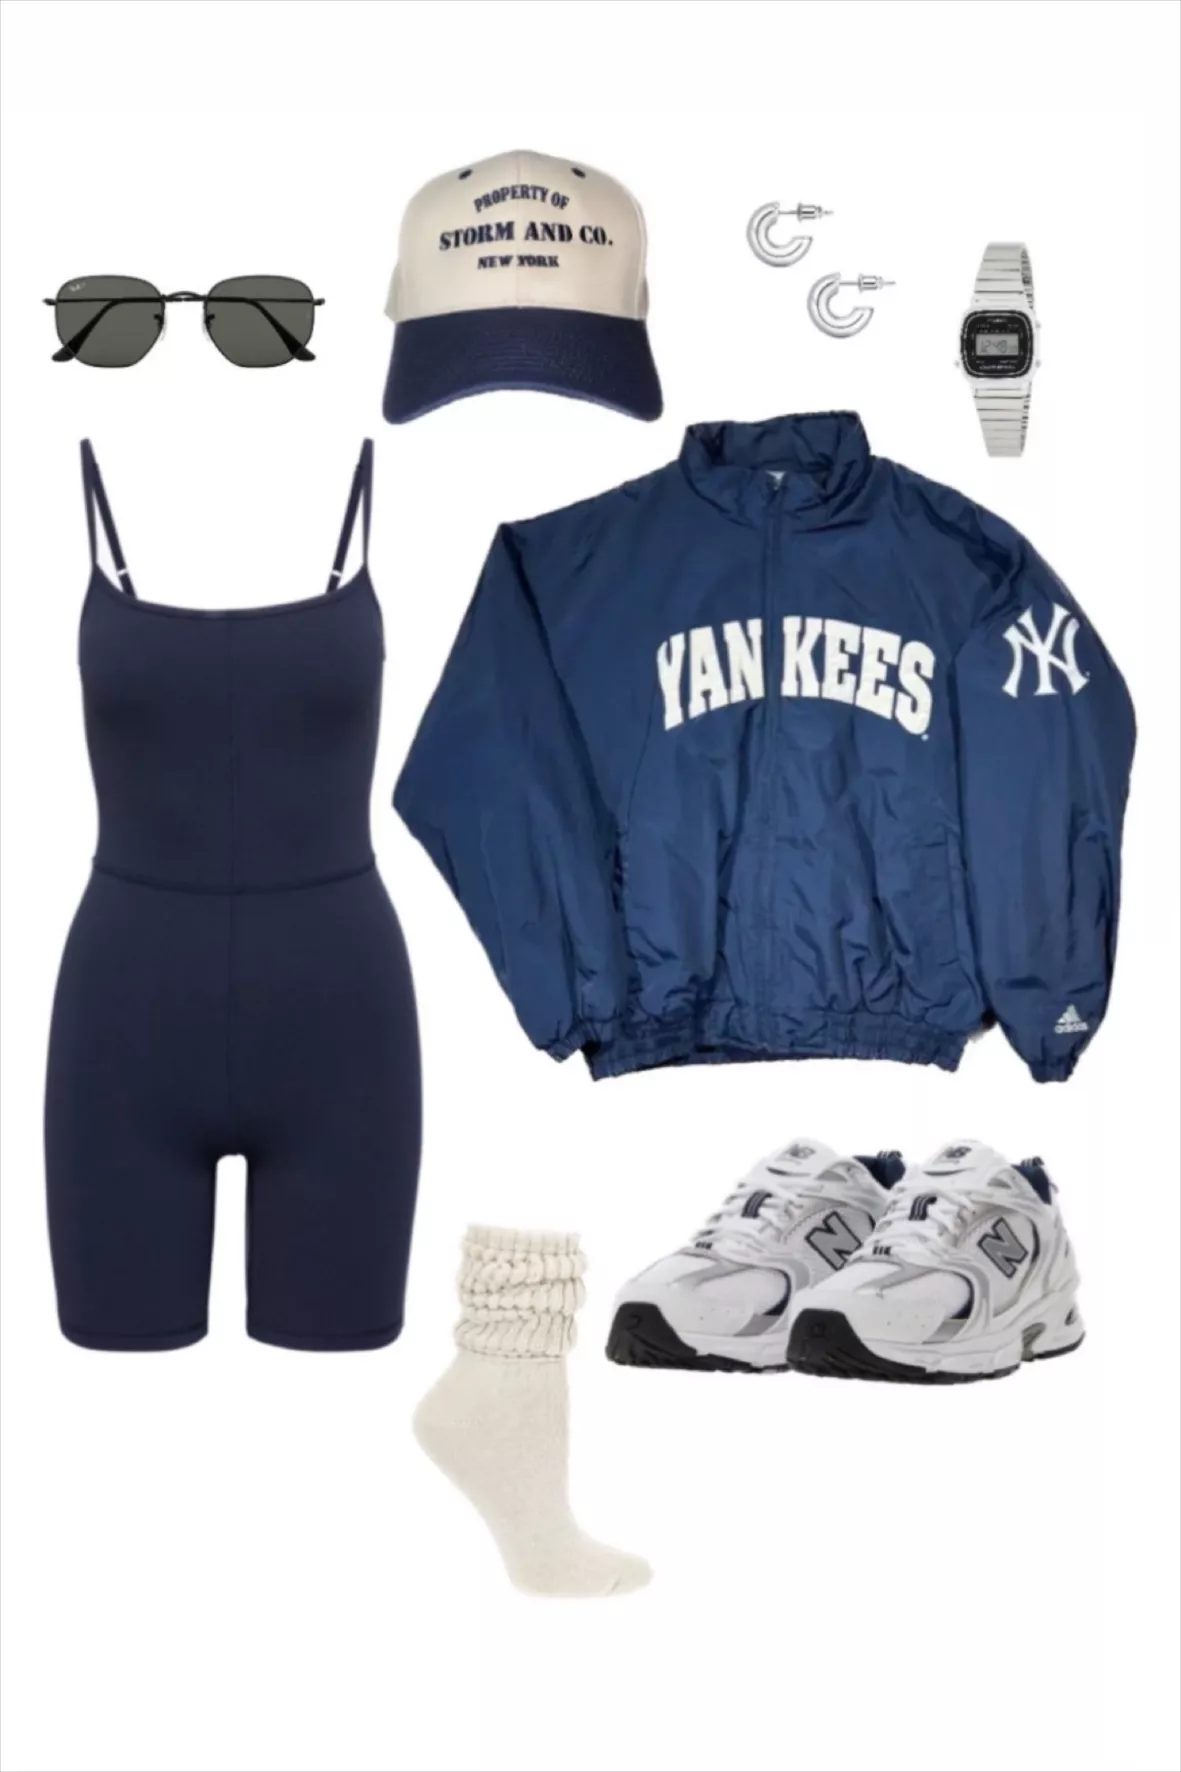 Yankees game outfit ideas  Baseball game outfits, Baseball outfit